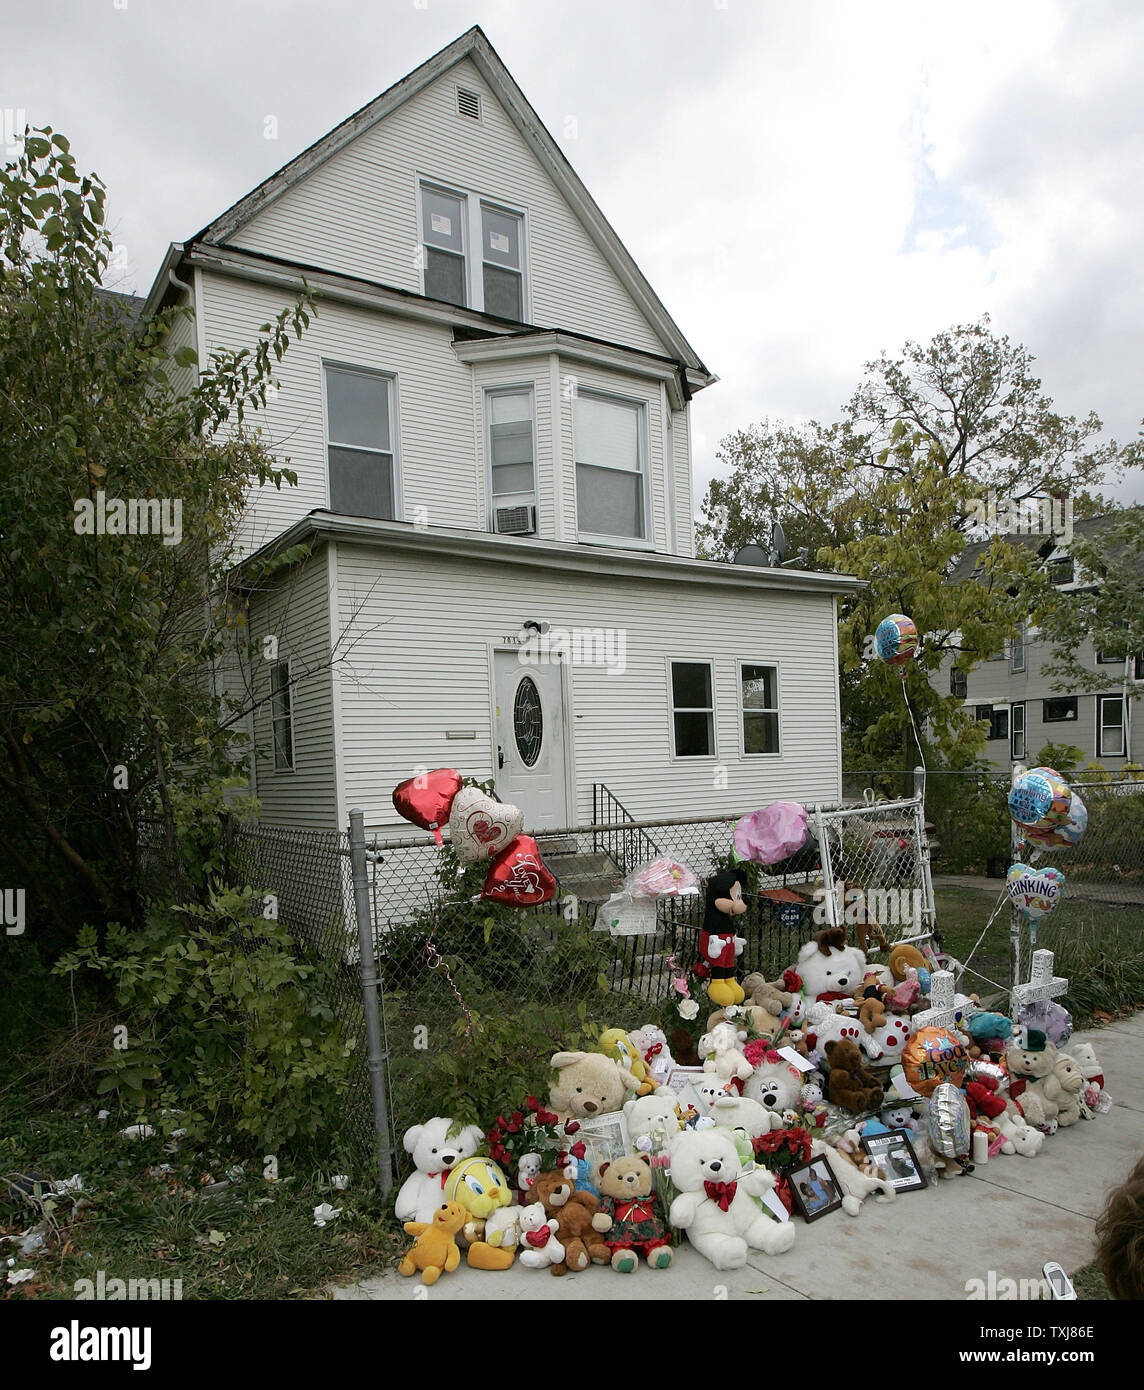 https://c8.alamy.com/comp/TXJ86E/a-makeshift-memorial-left-by-neighbors-and-friends-stands-in-front-of-the-childhood-home-of-oscar-winning-actress-jennifer-hudson-on-october-27-2008-a-body-found-in-an-suv-on-chicagos-west-side-early-monday-morning-is-believed-to-be-that-of-jennifer-hudsons-missing-7-year-old-nephew-julian-king-the-focus-of-a-desperate-search-since-the-oscar-winners-mother-darnell-donerson-57-and-29-year-old-brother-jason-hudson-were-found-shot-to-death-in-their-home-three-days-earlier-upi-photobrian-kersey-TXJ86E.jpg